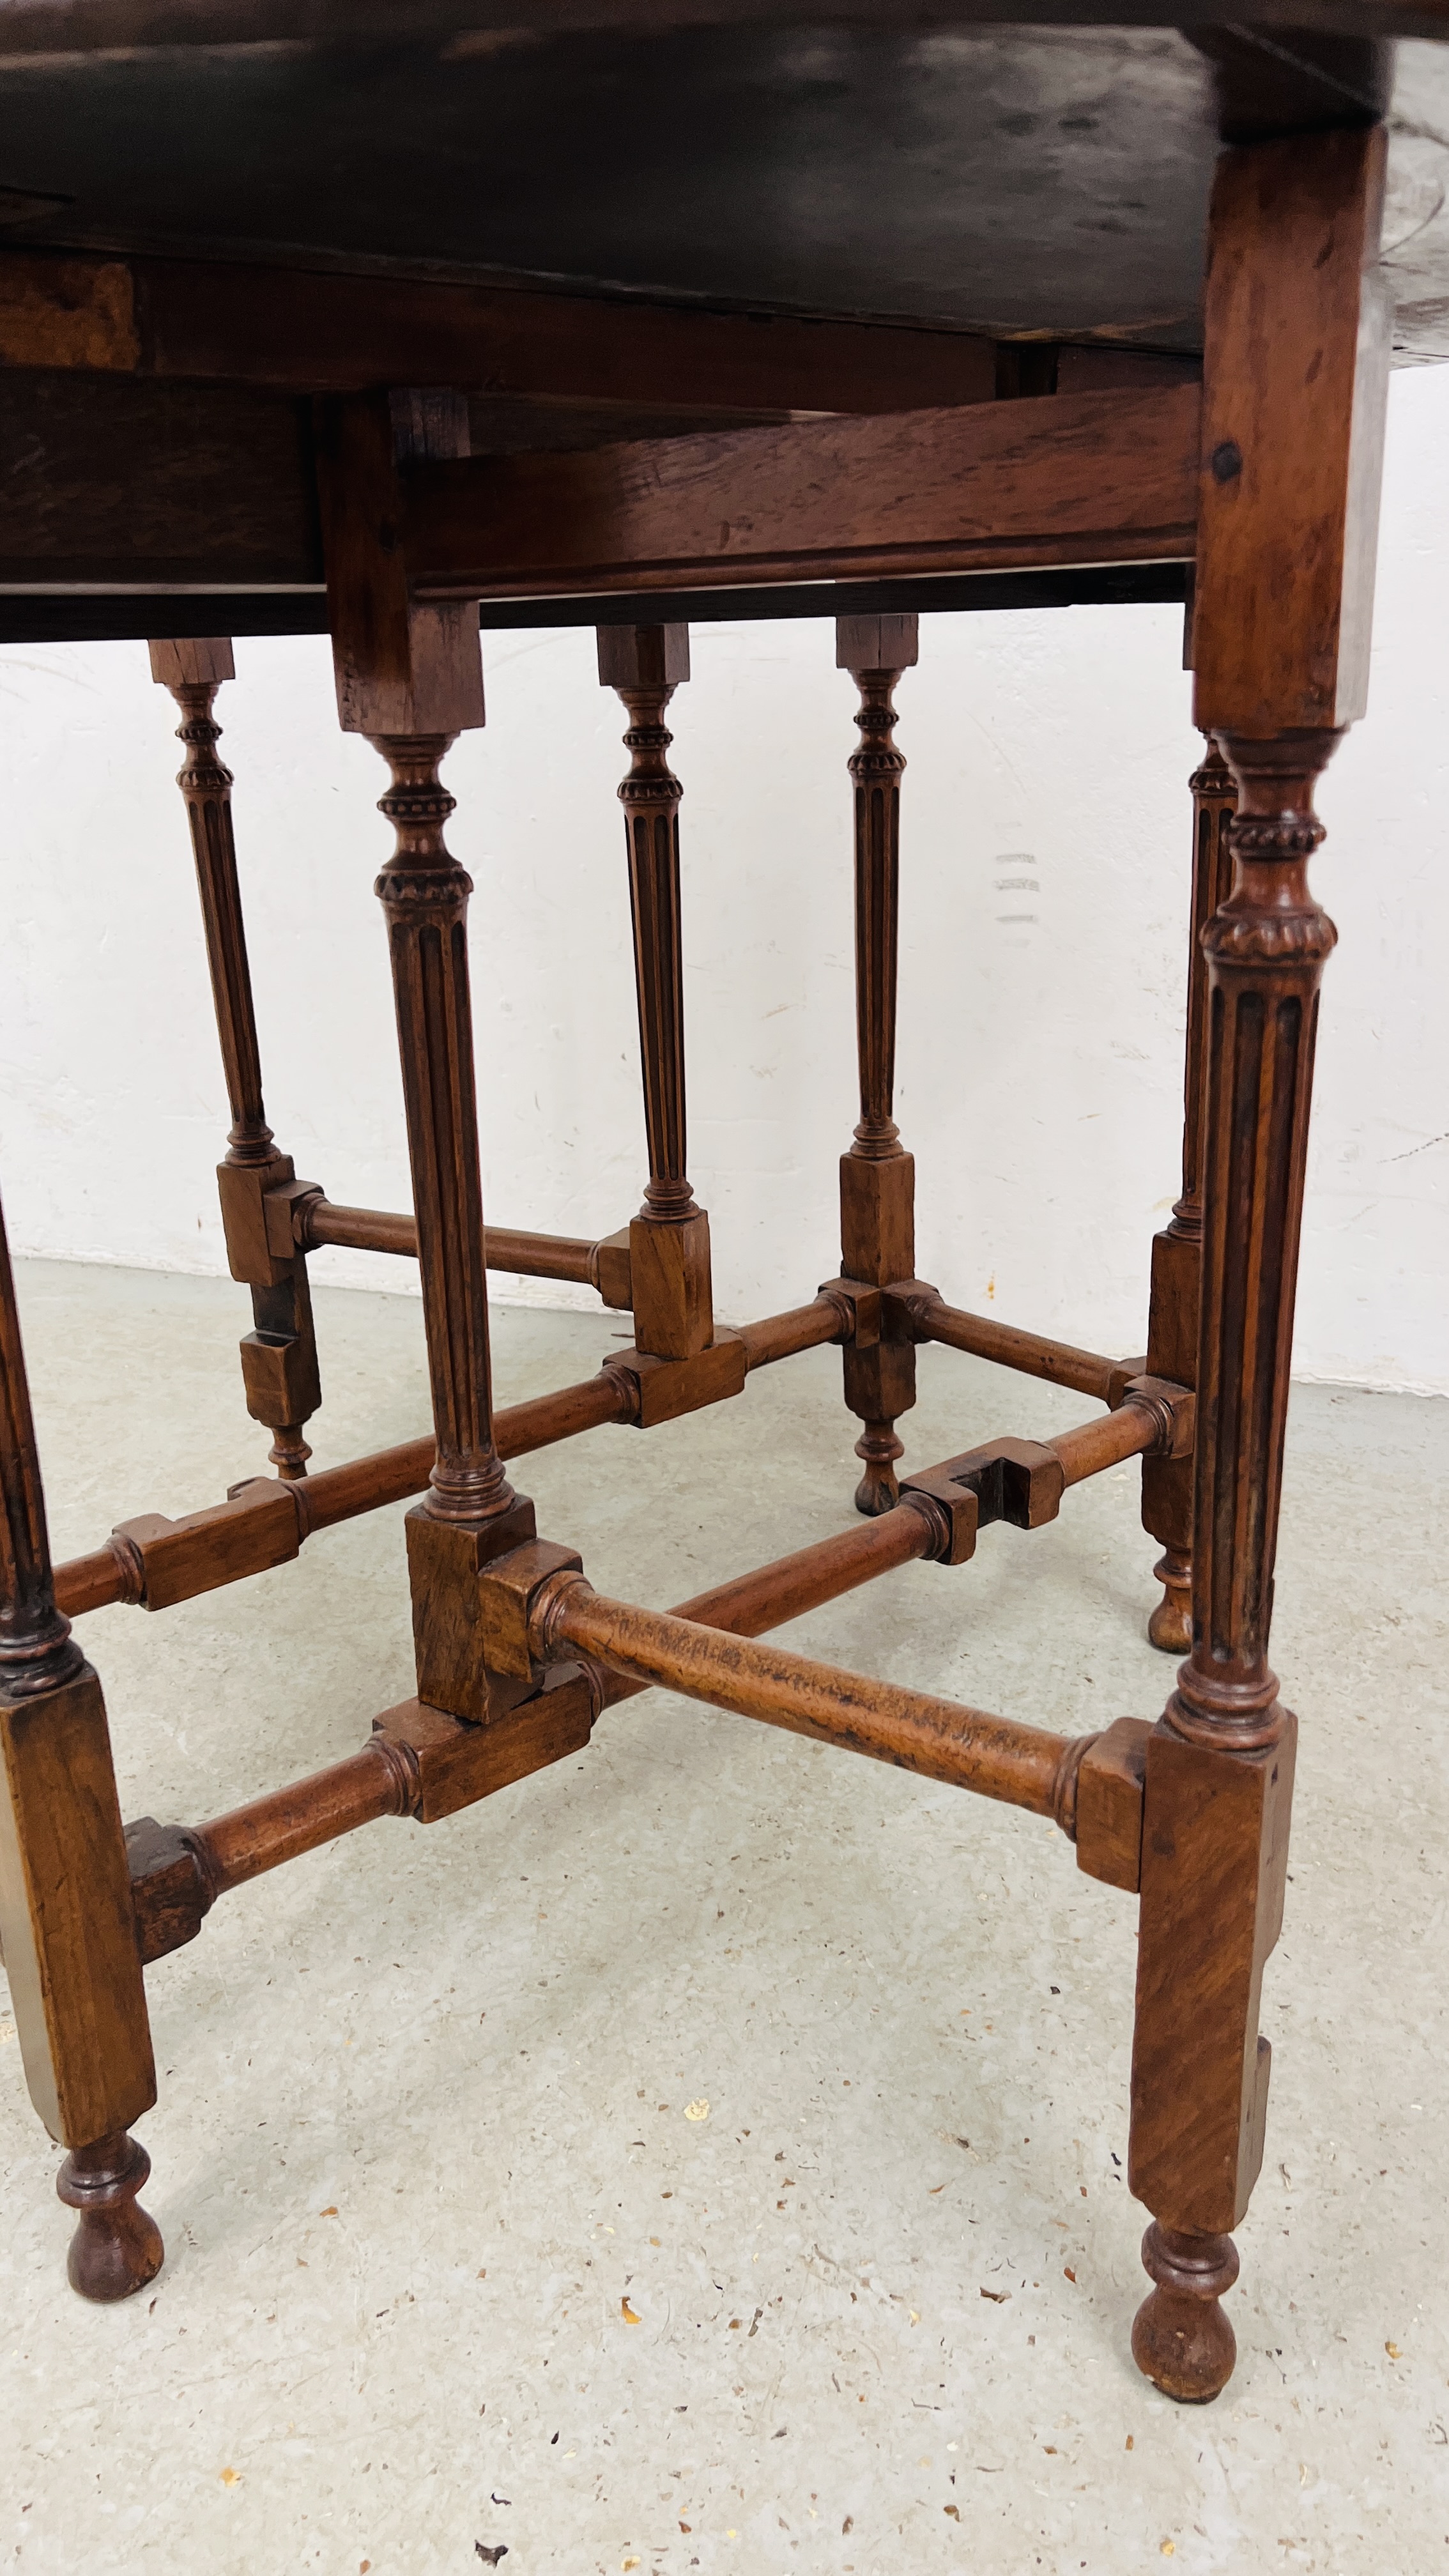 A MAHOGANY GATELEG TABLE, C18TH. AND LATER, EXTENDED 100CM. - Image 11 of 18